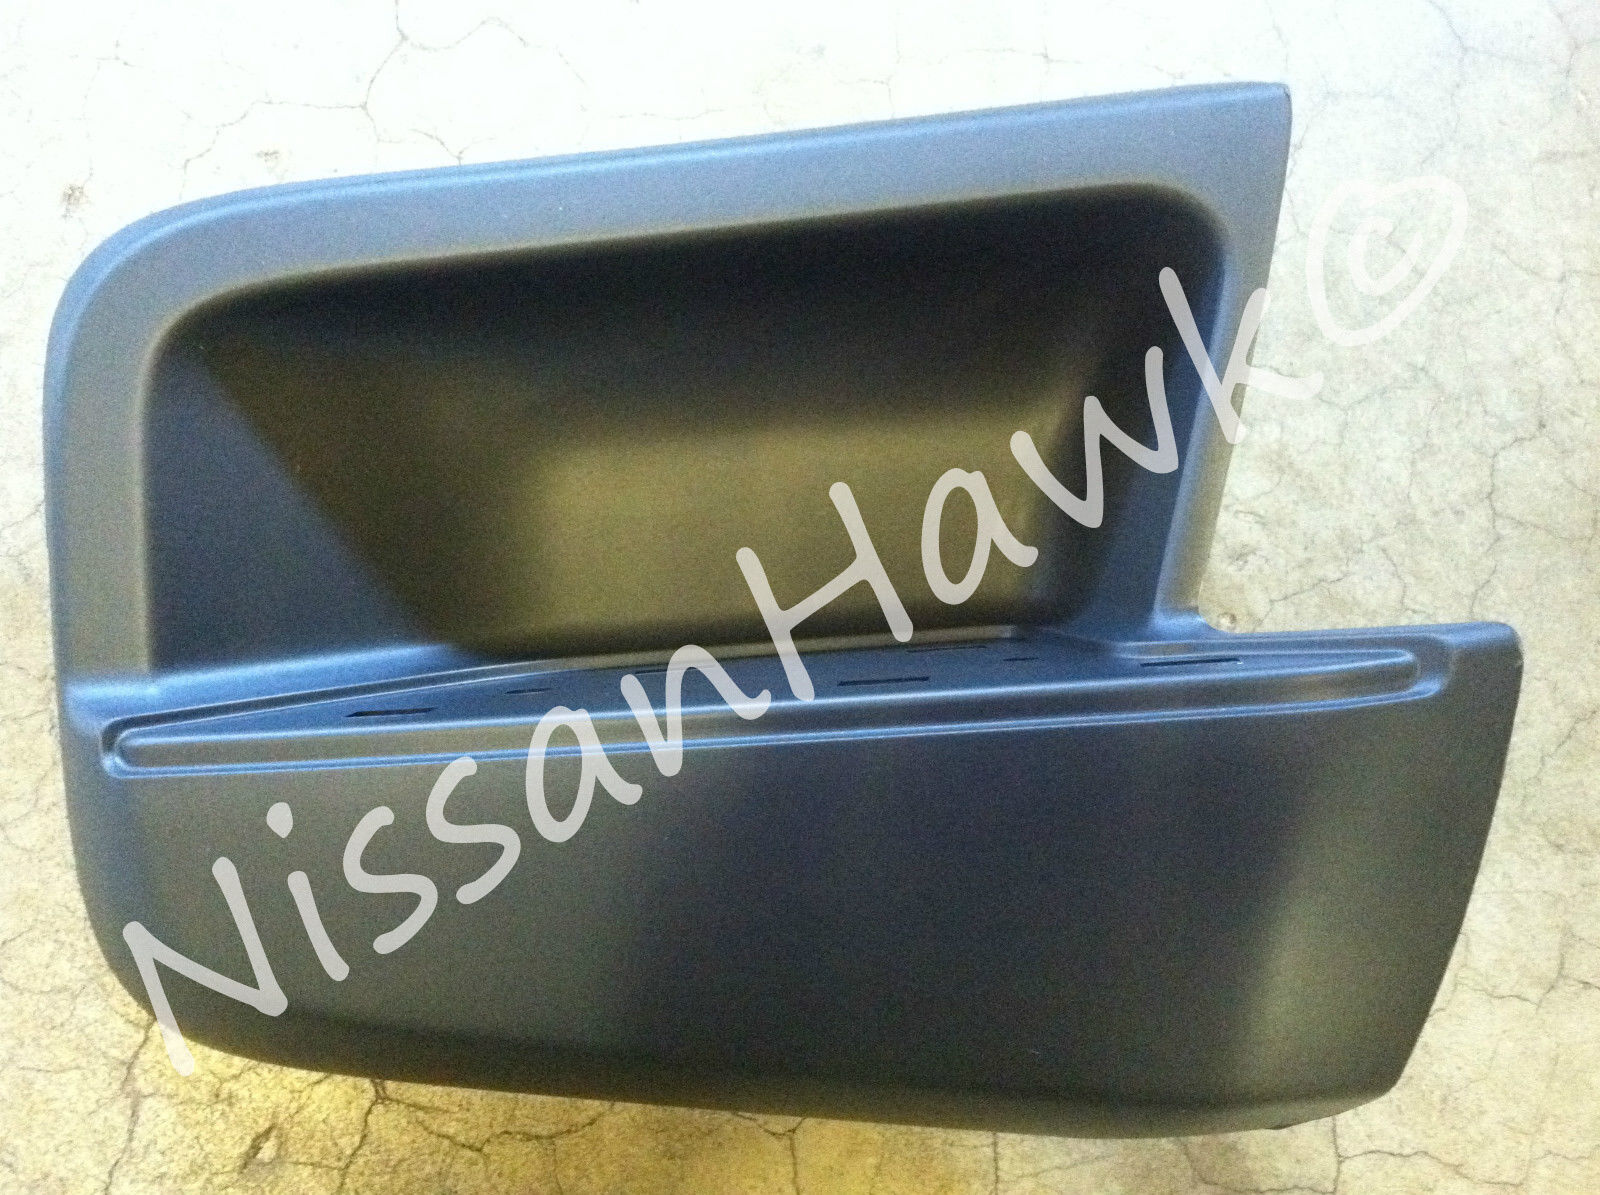 NEW OEM 2005-2015 FACTORY NISSAN XTERRA RIGHT REAR BUMPER STEP ONLY